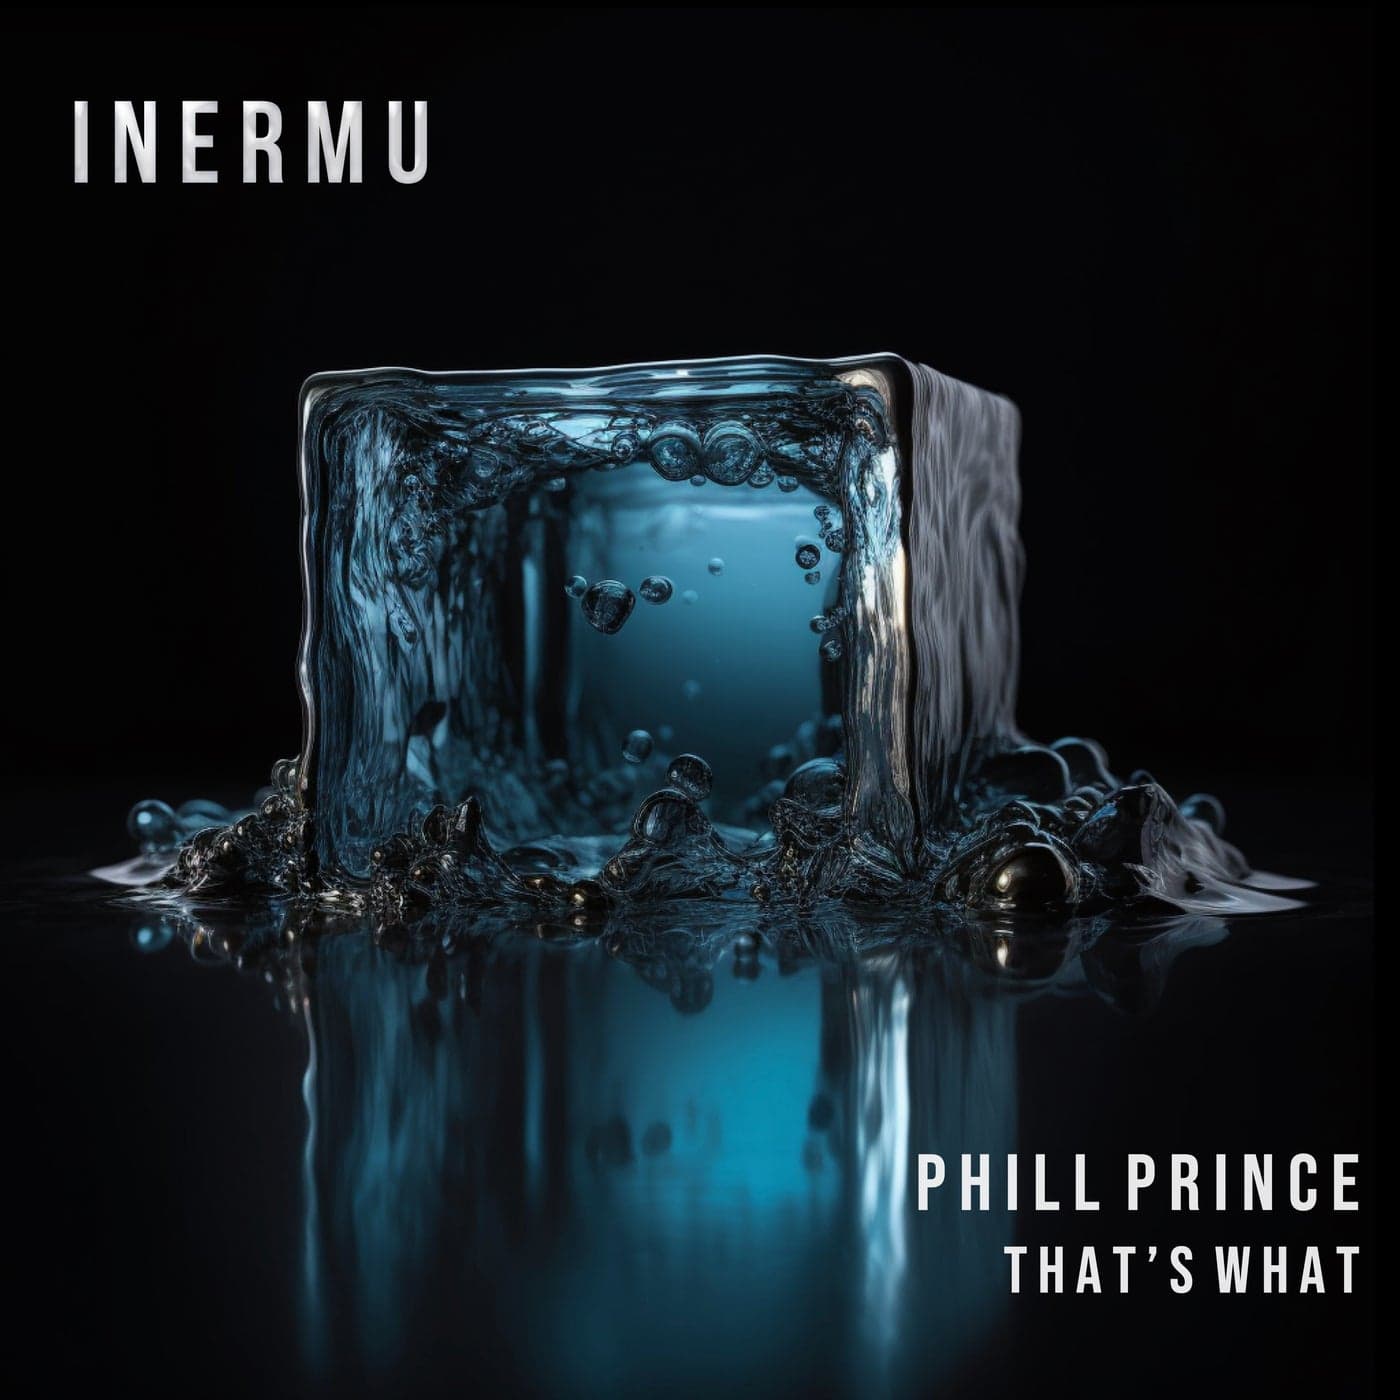 image cover: Phill Prince - That's What on Inermu